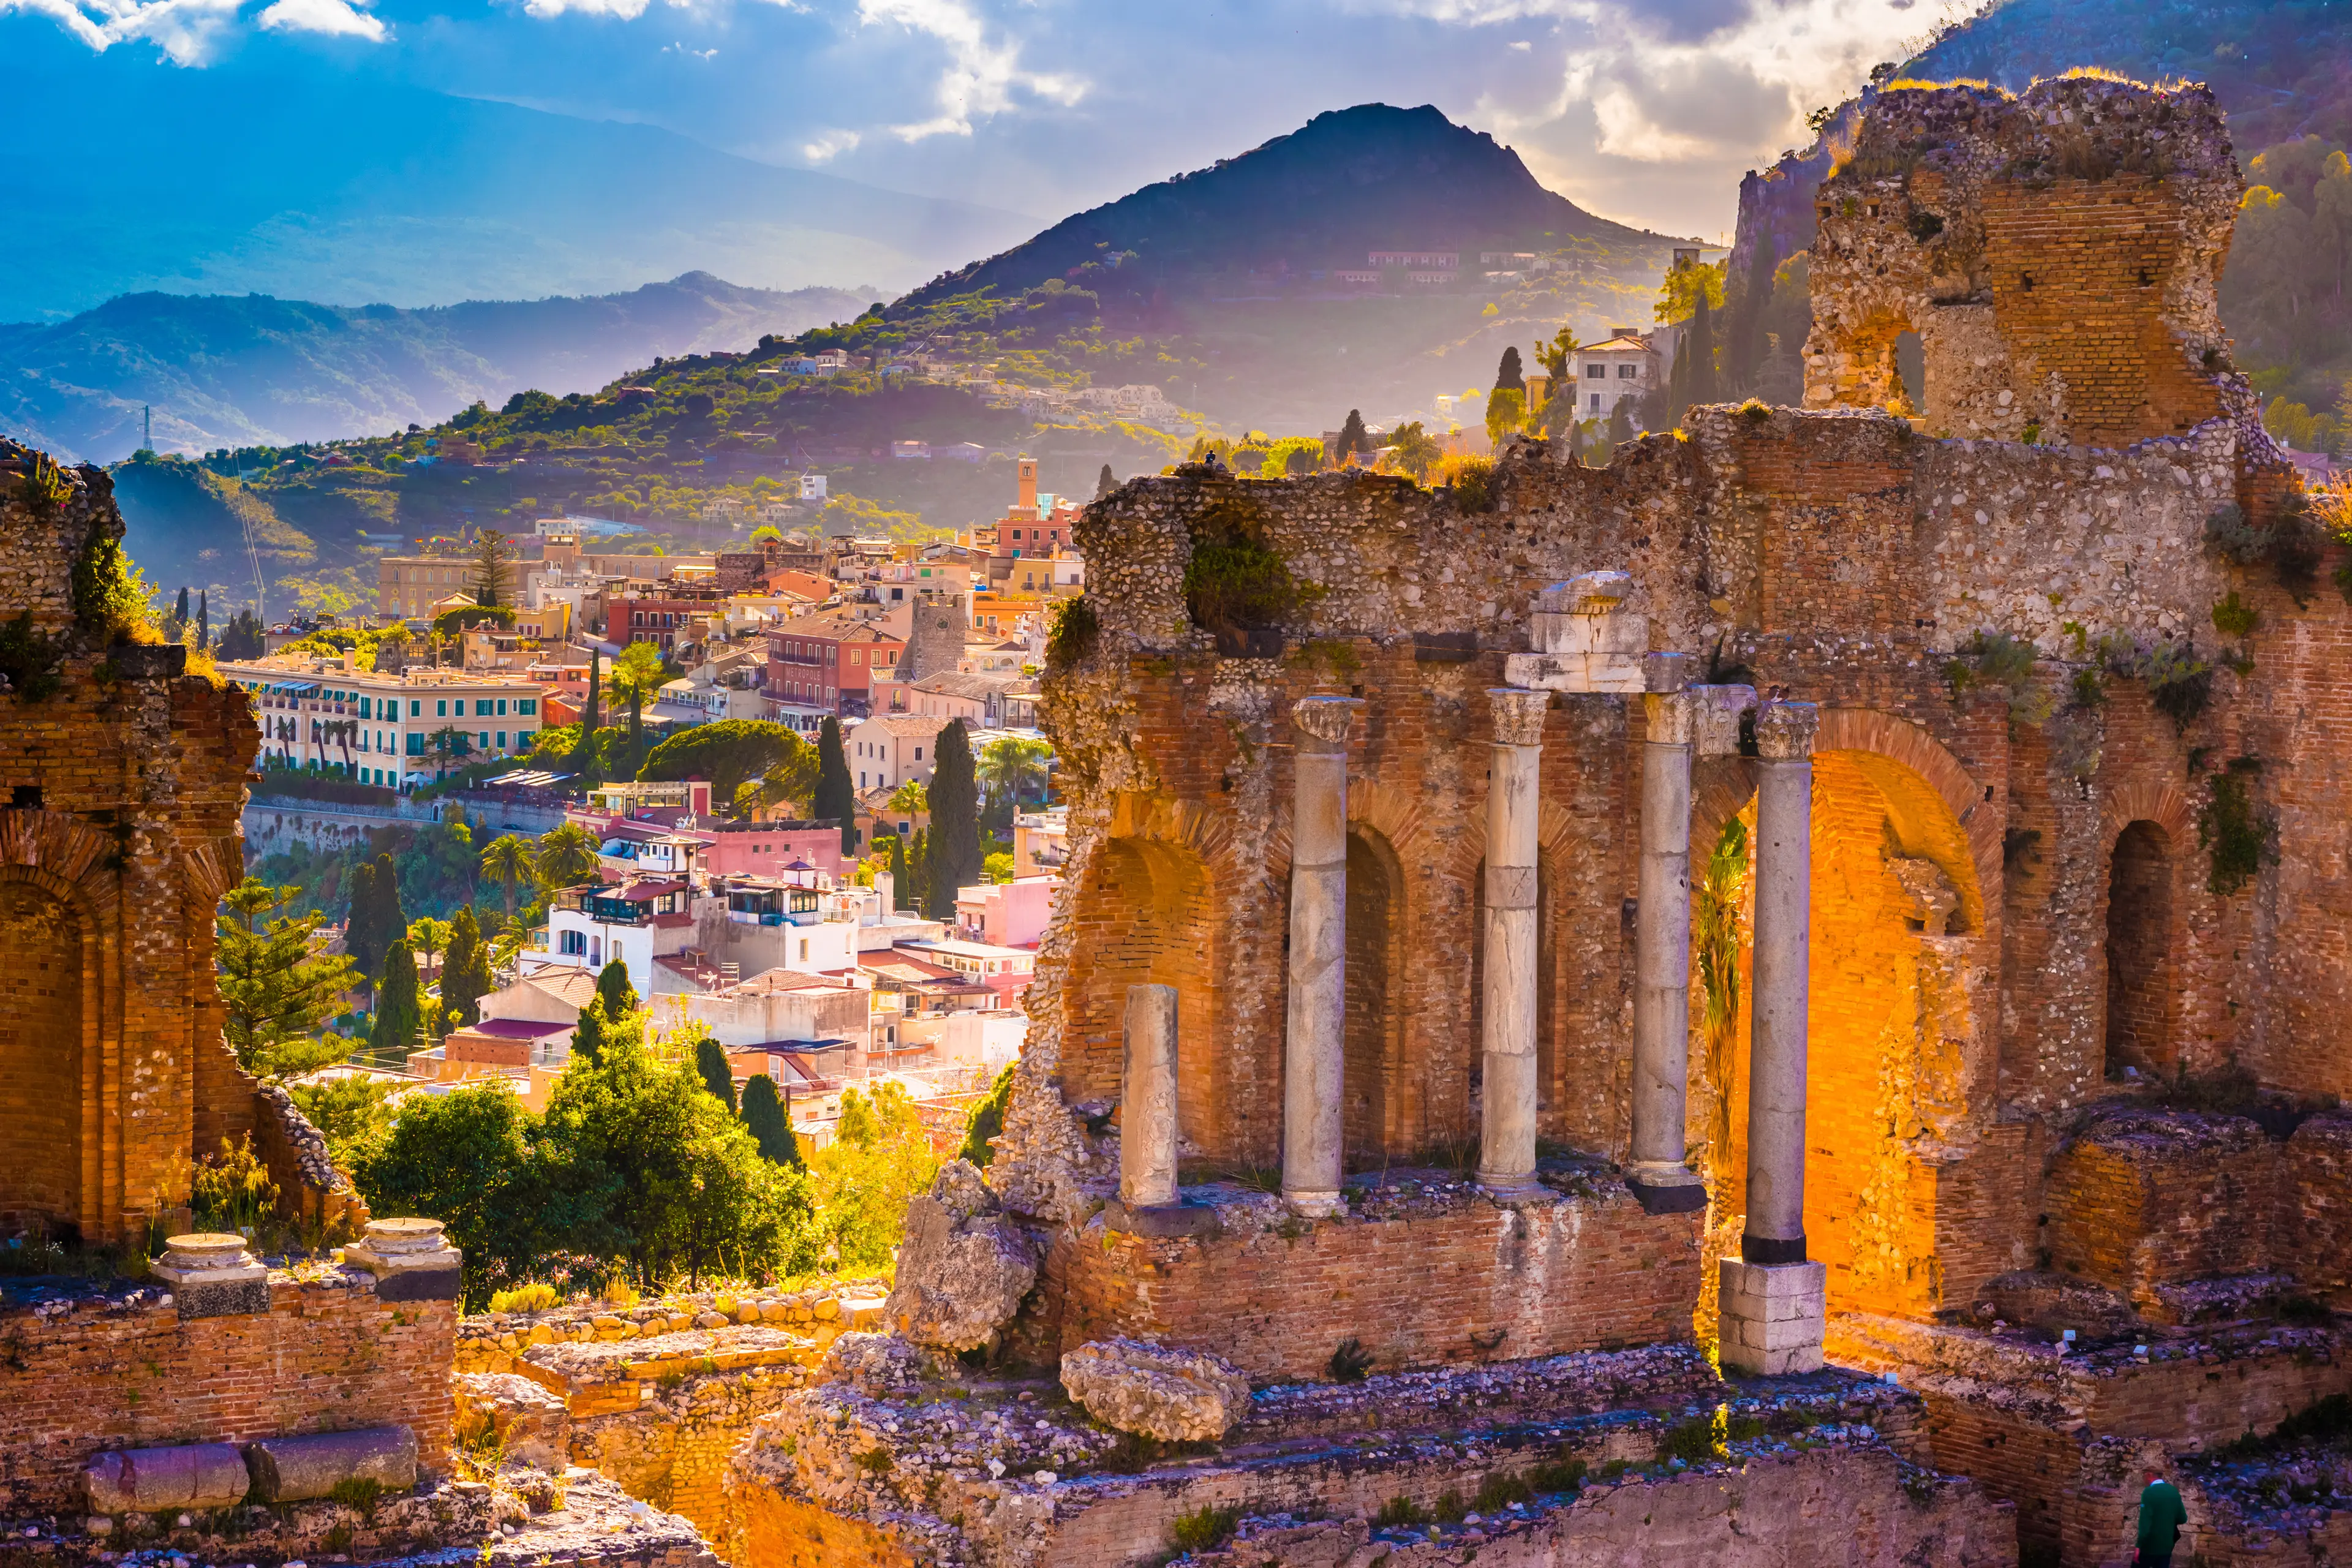 Explore Sicily: One Day Itinerary in Italy's Southern Jewel